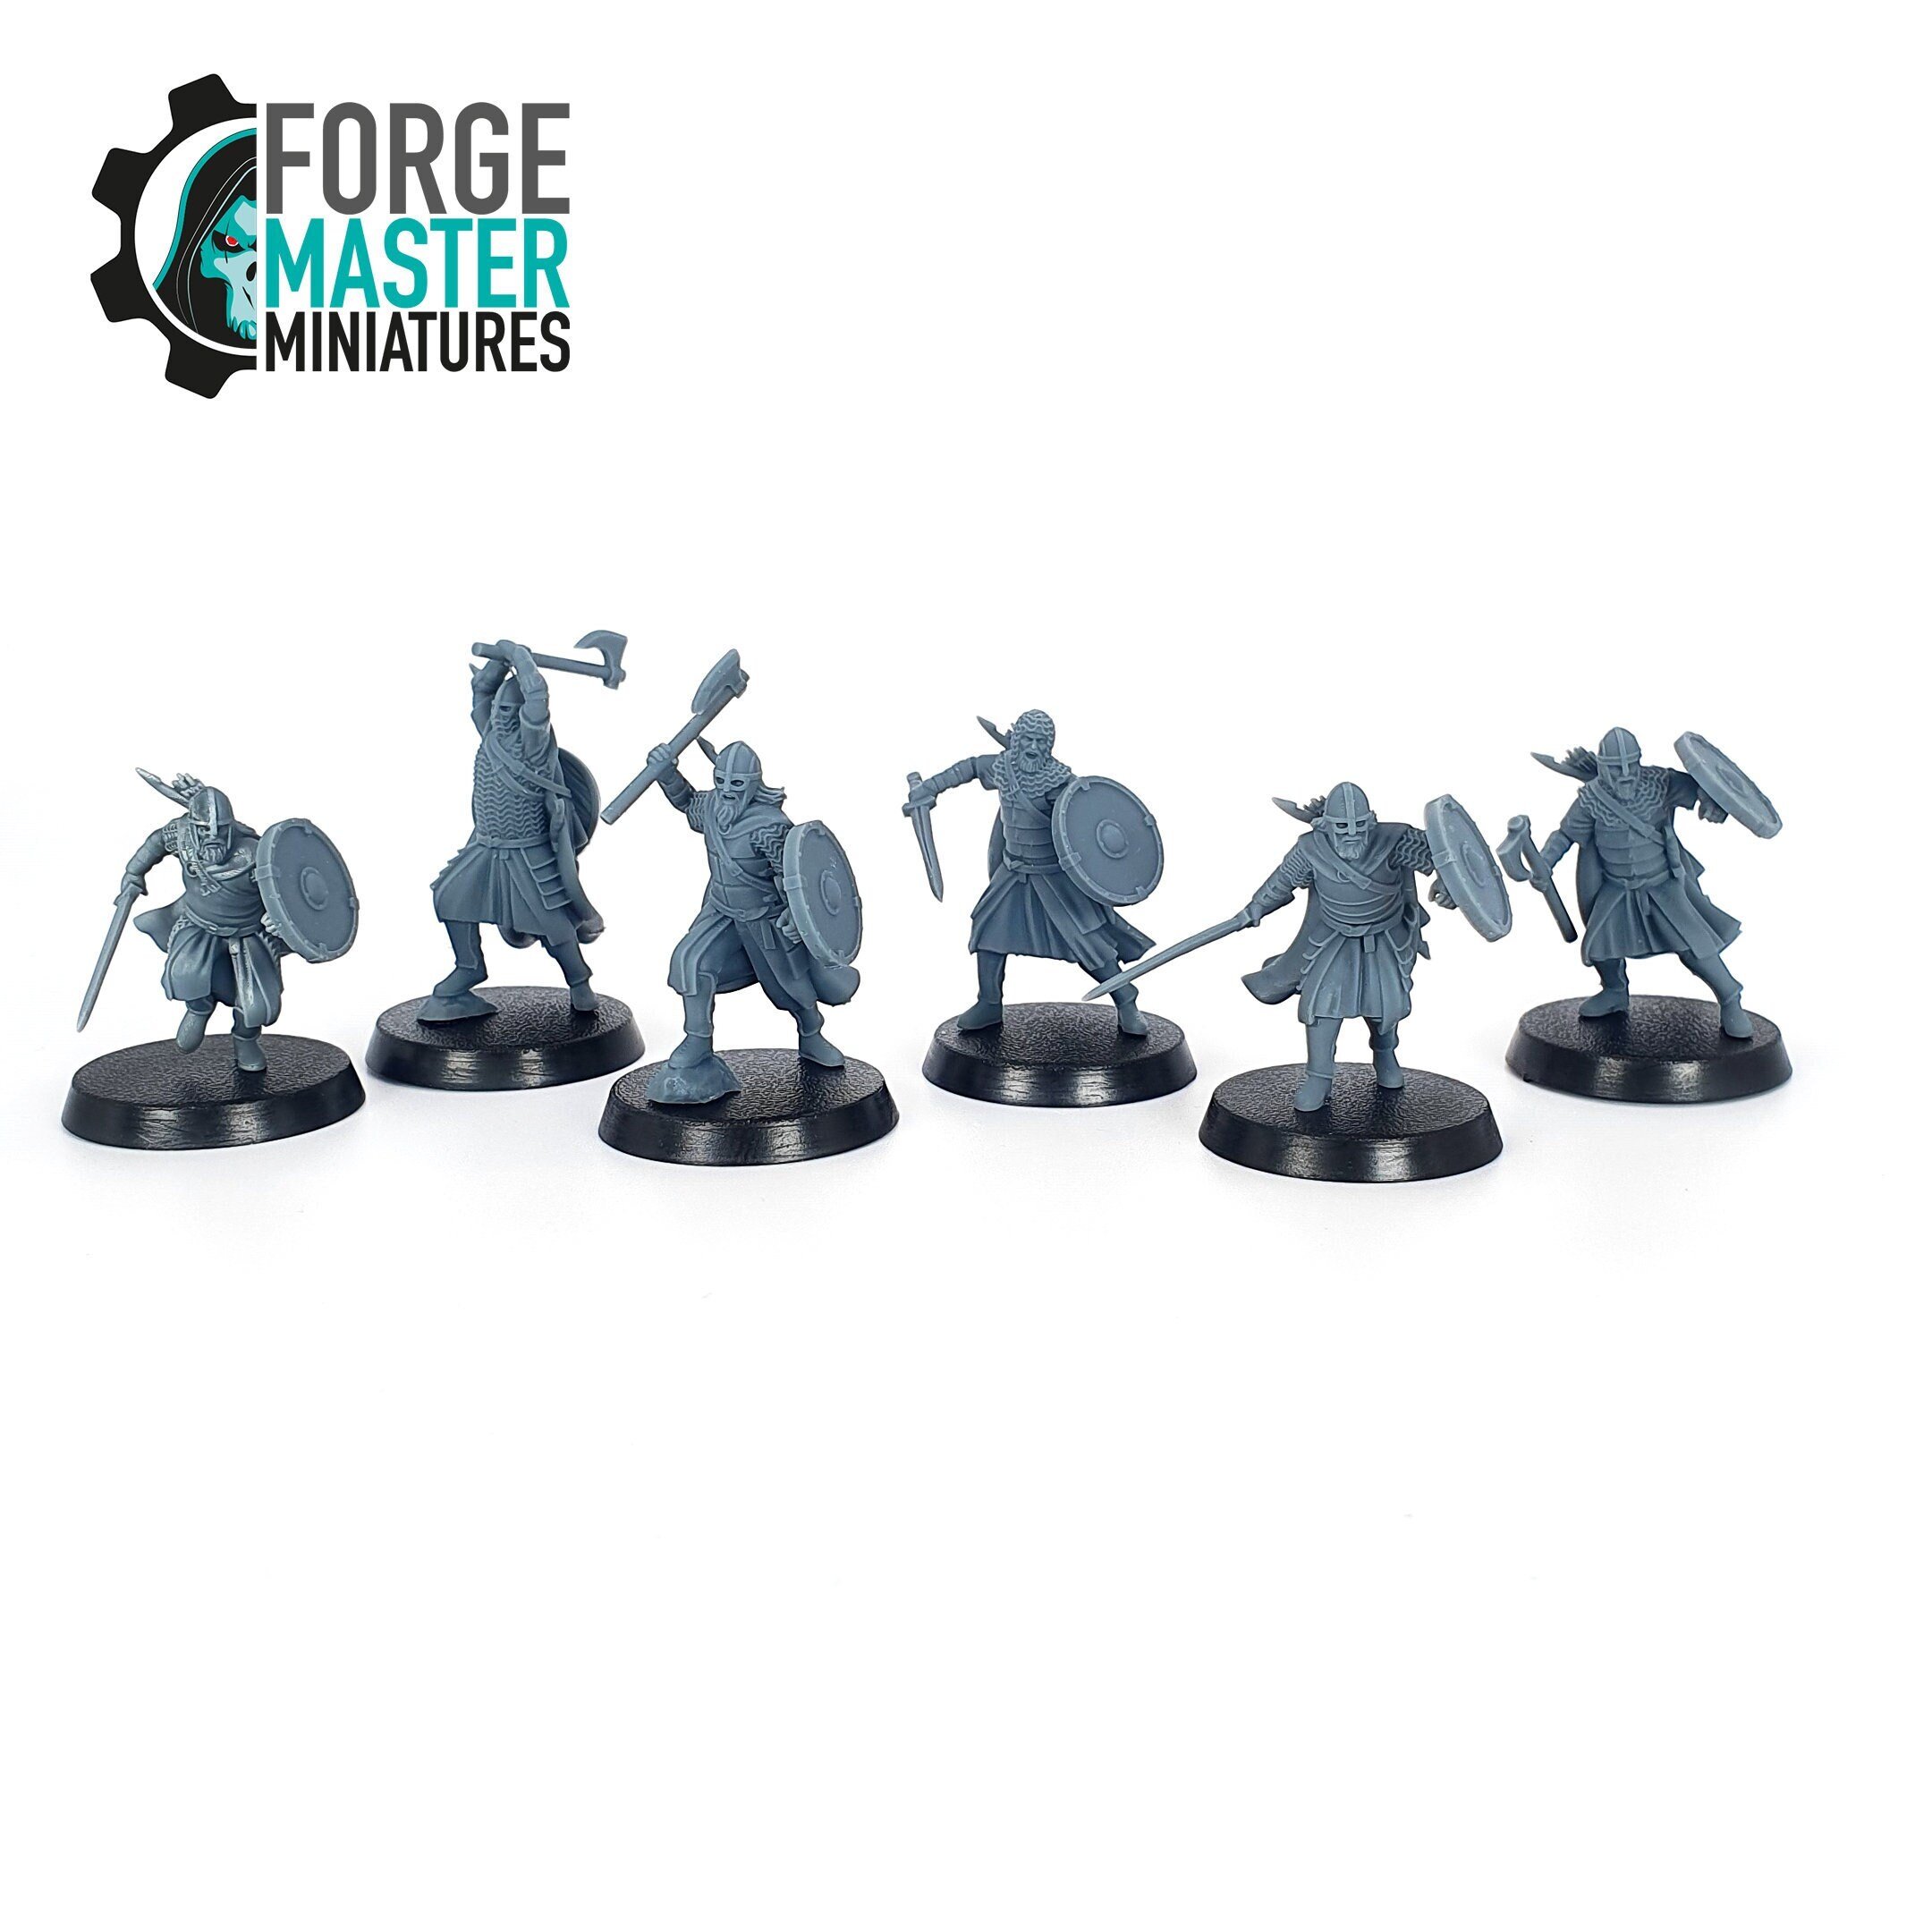 Riders of the West Warriors wargaming miniatures from the West Humans range by Davale Games 3D printed by Forgemaster Miniatures